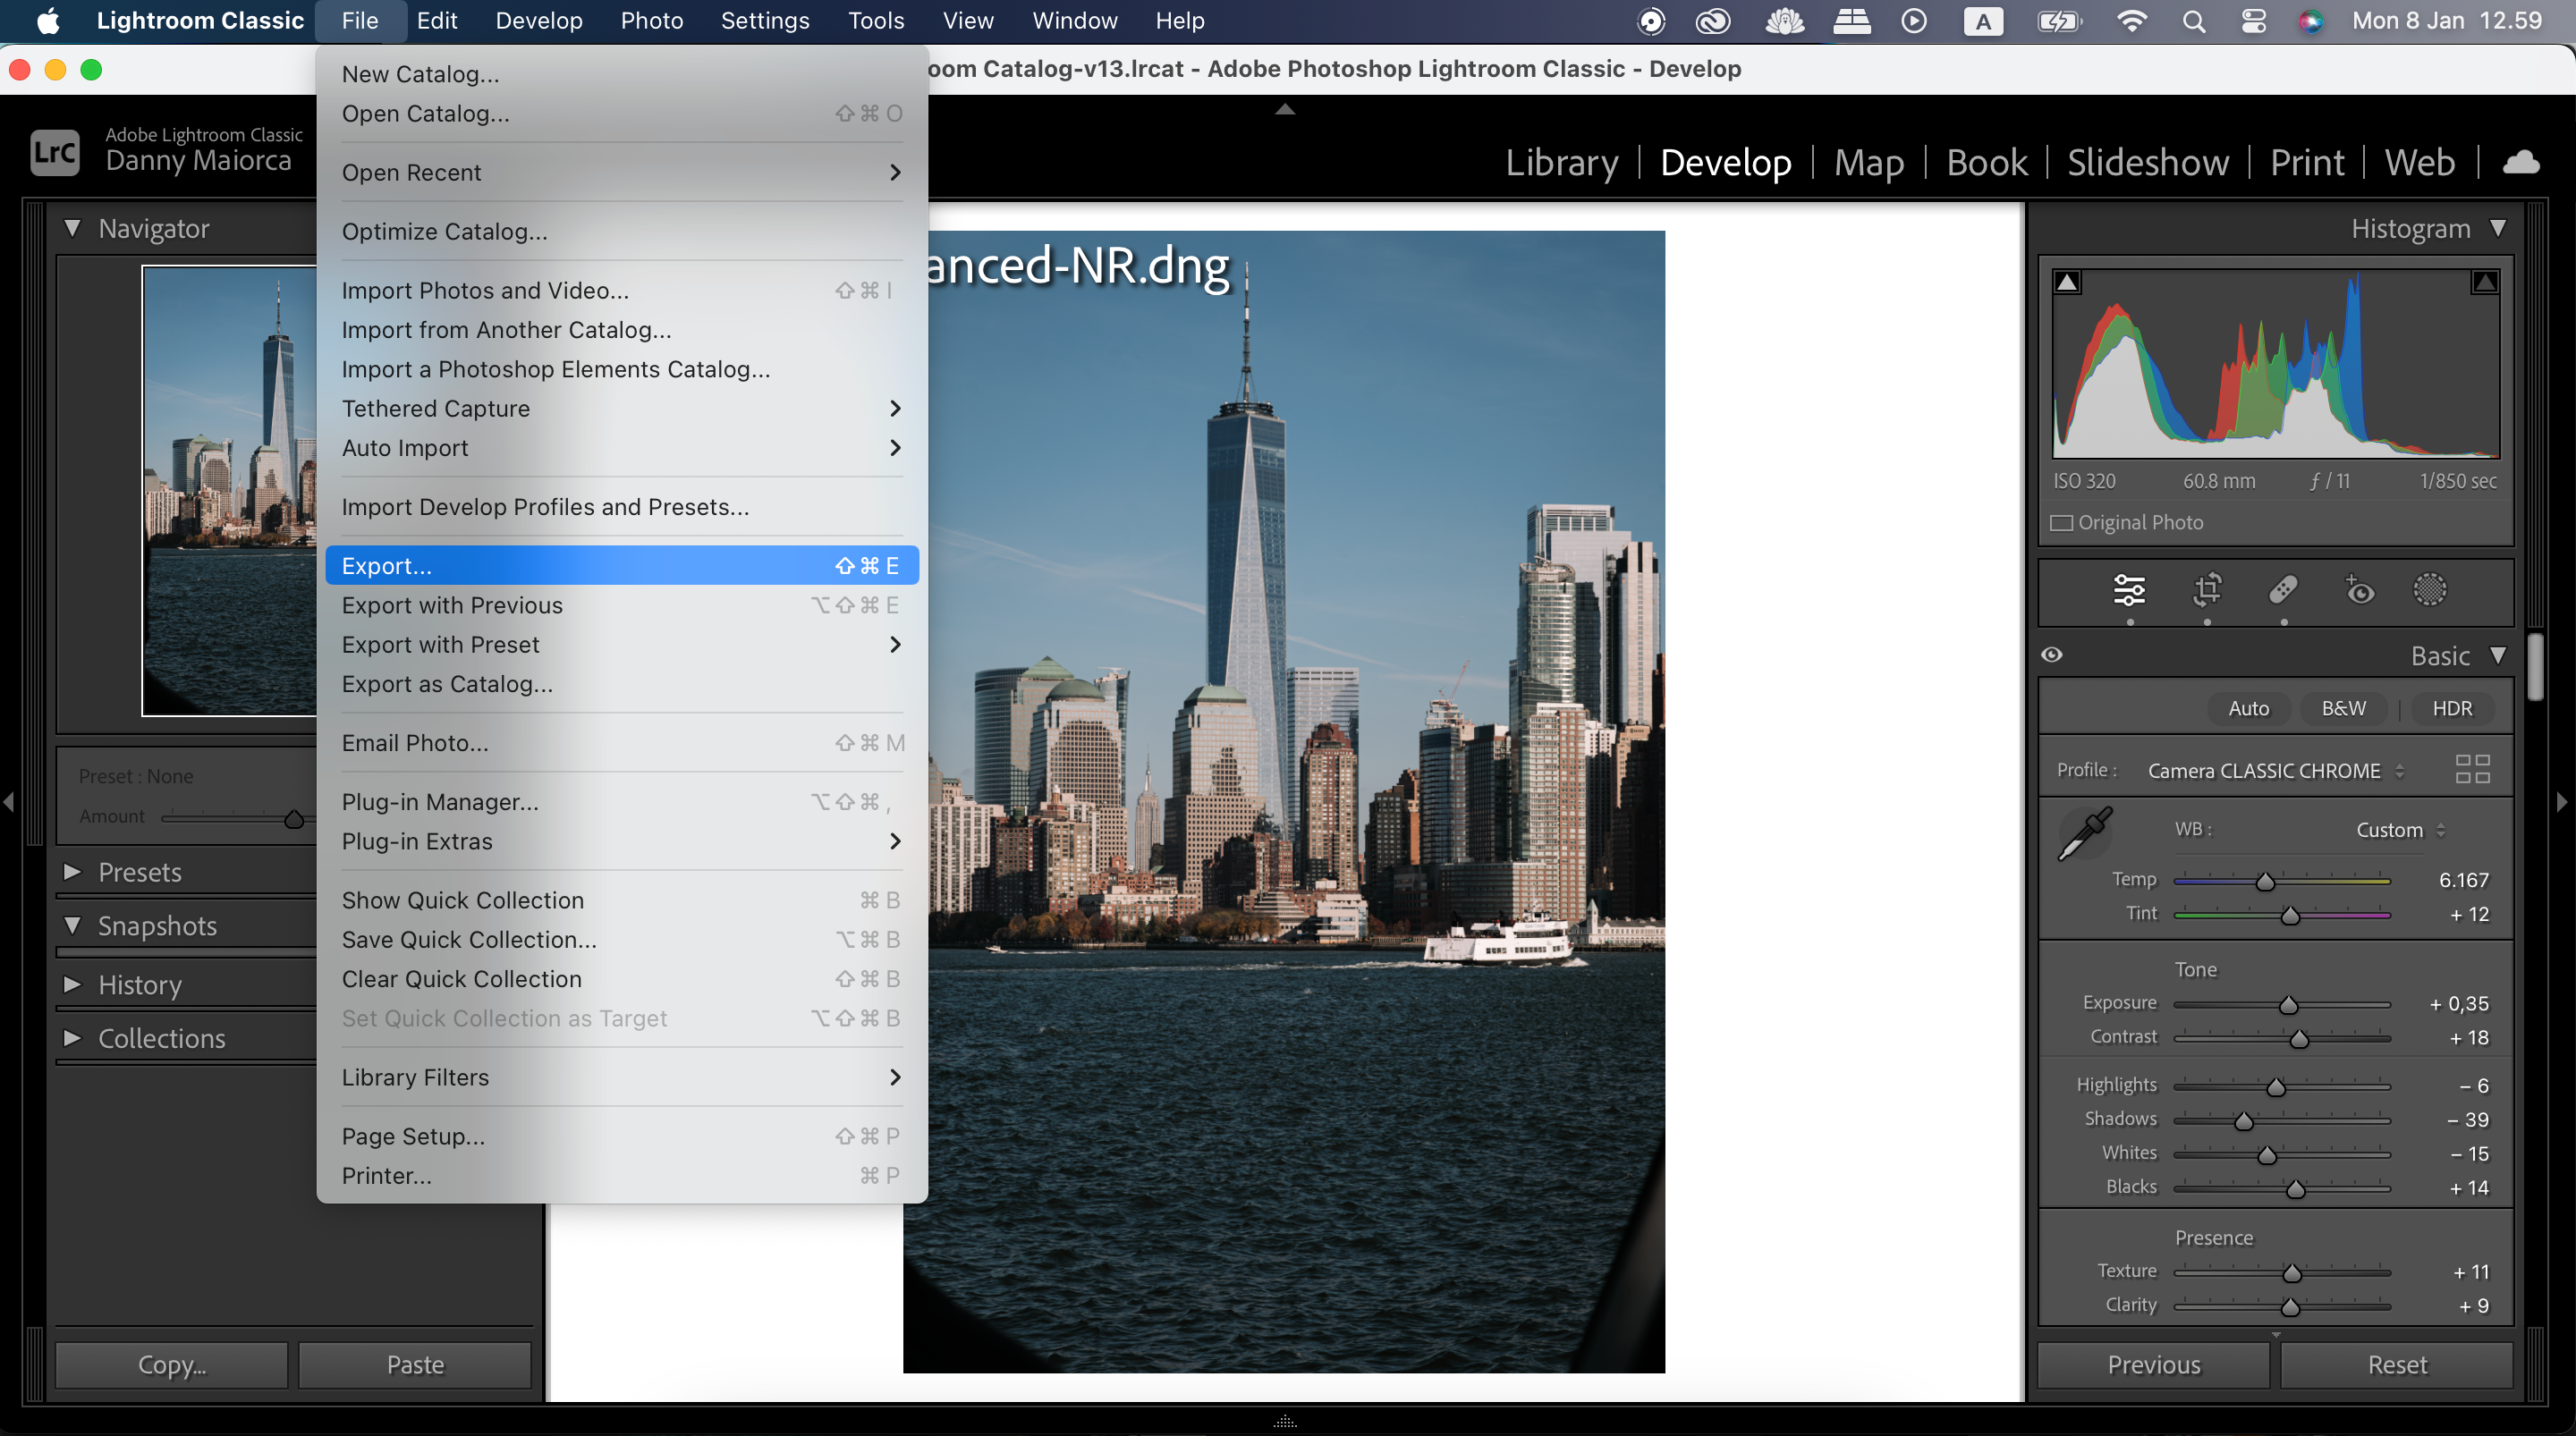 The option to export a file from Adobe Lightroom